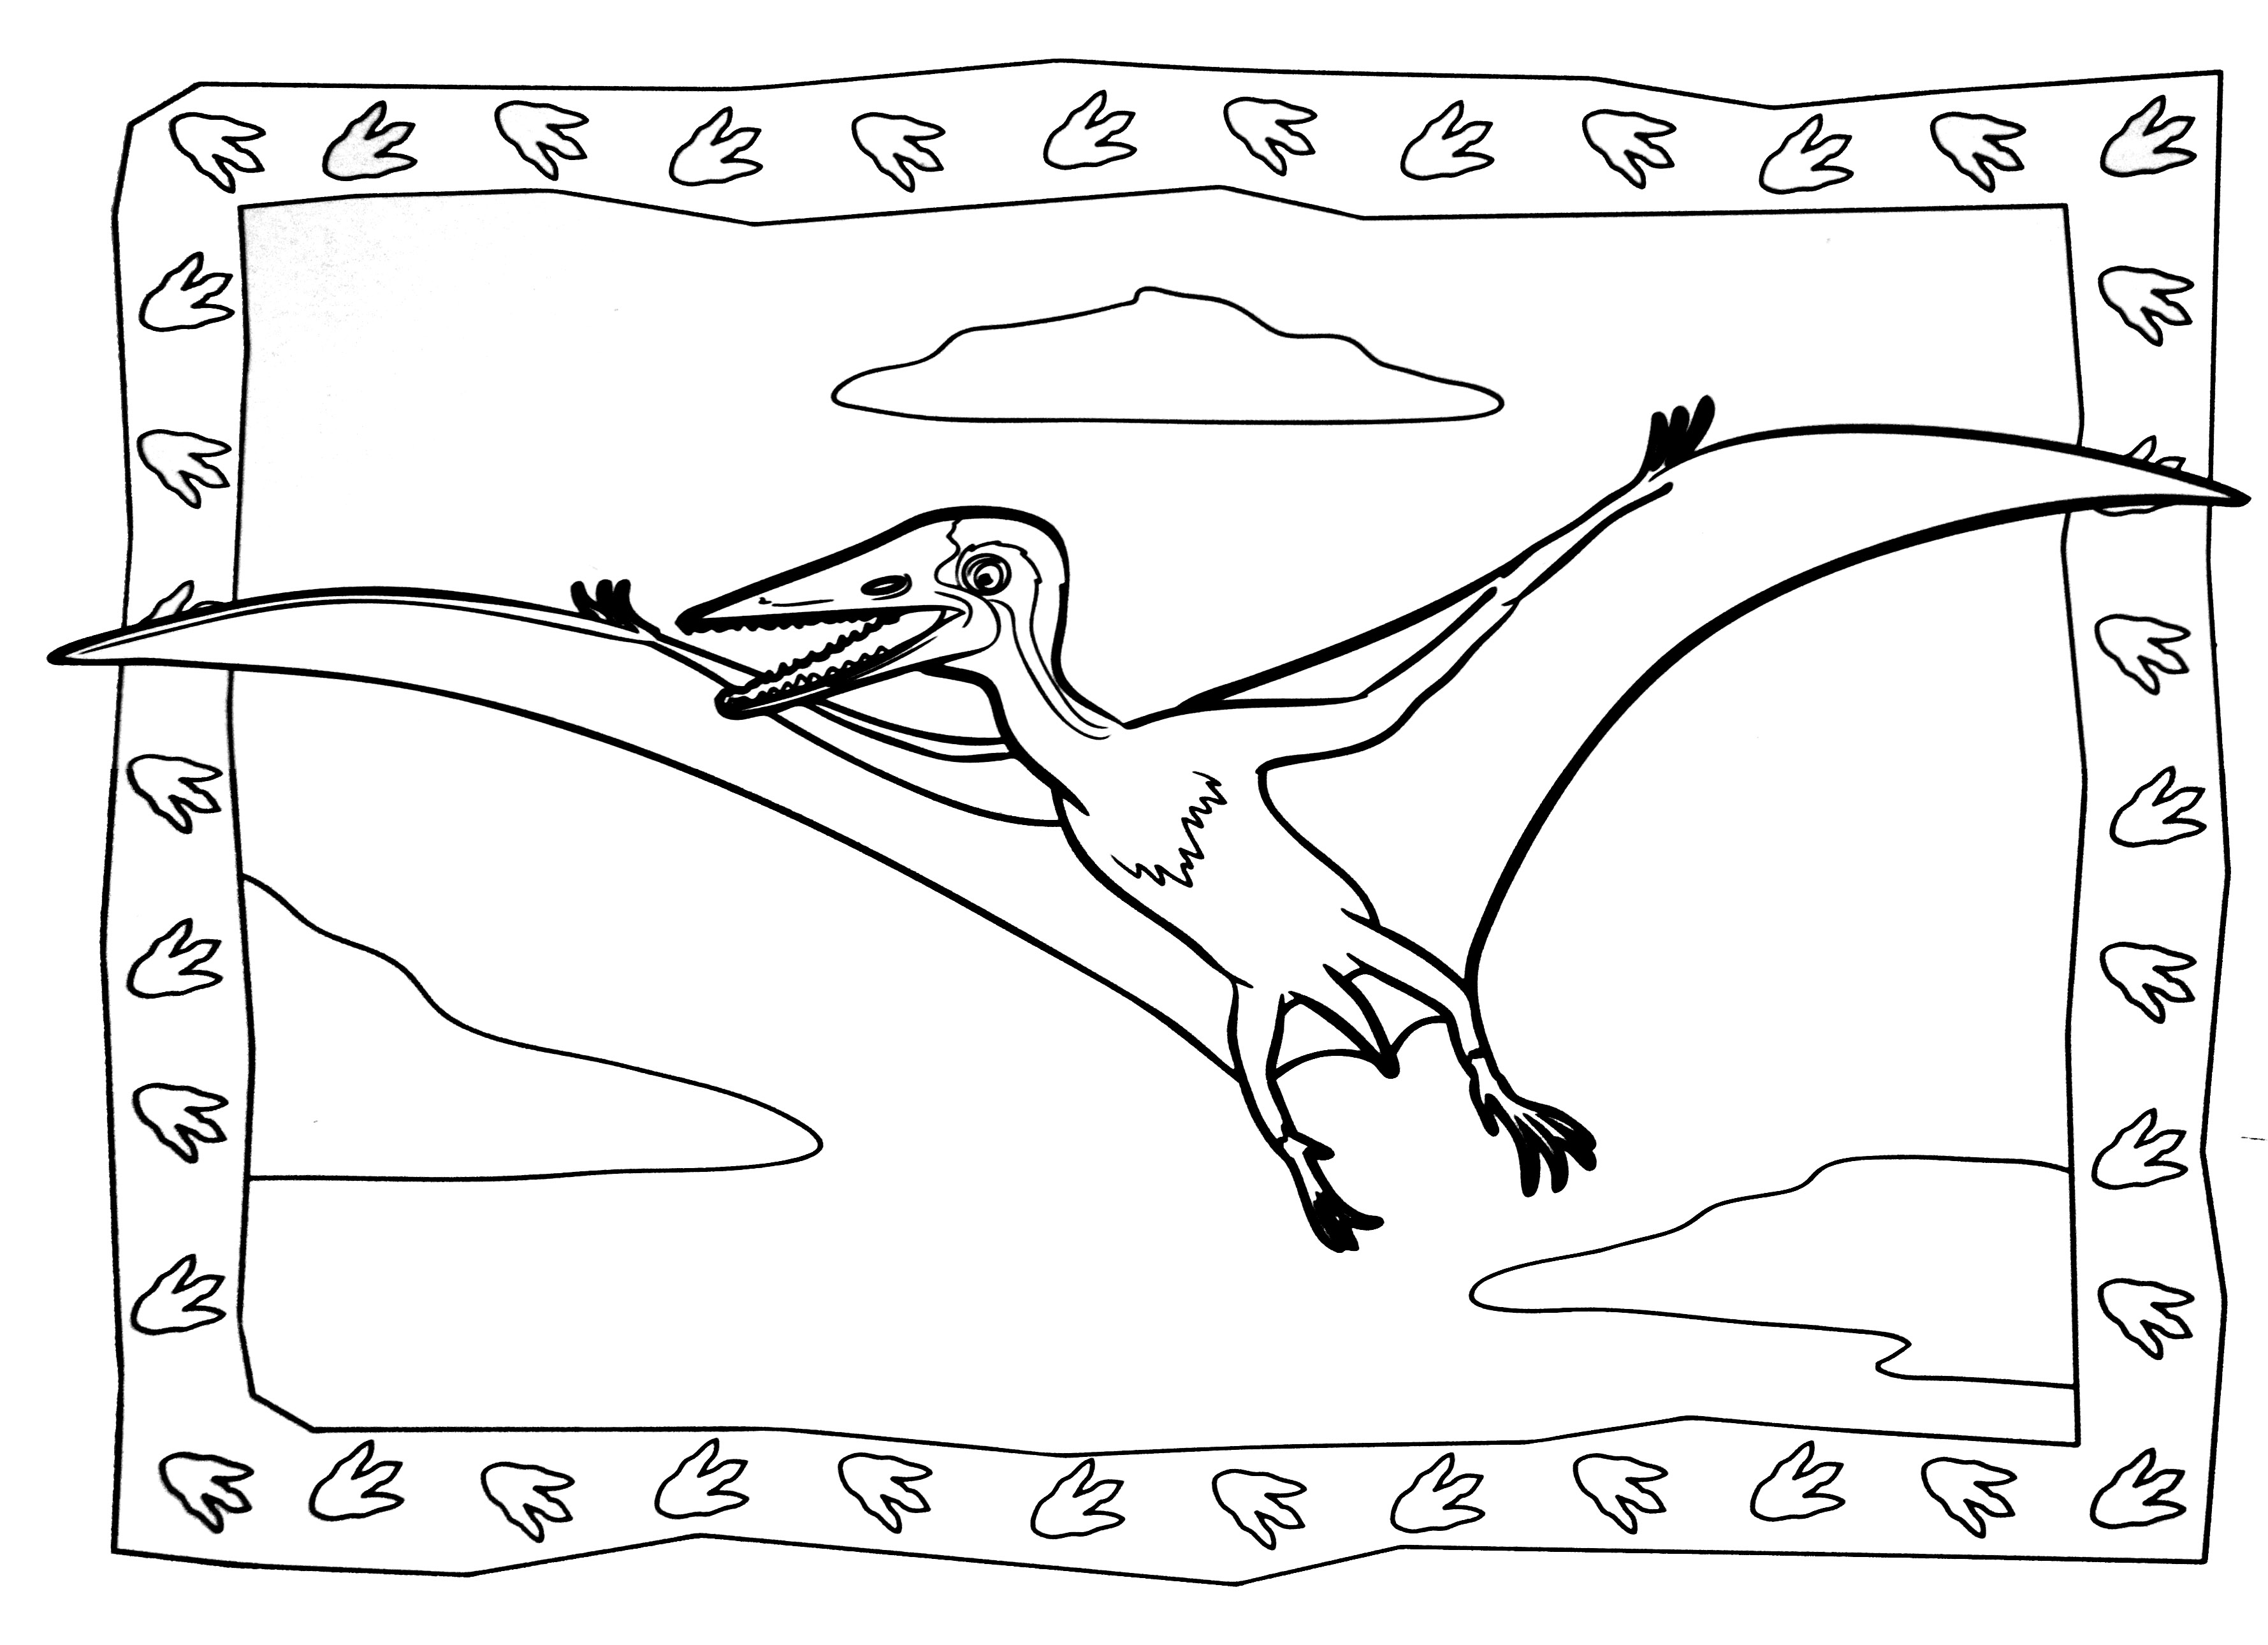 Dinosaurs for children : Velociraptor - Dinosaurs Kids Coloring Pages